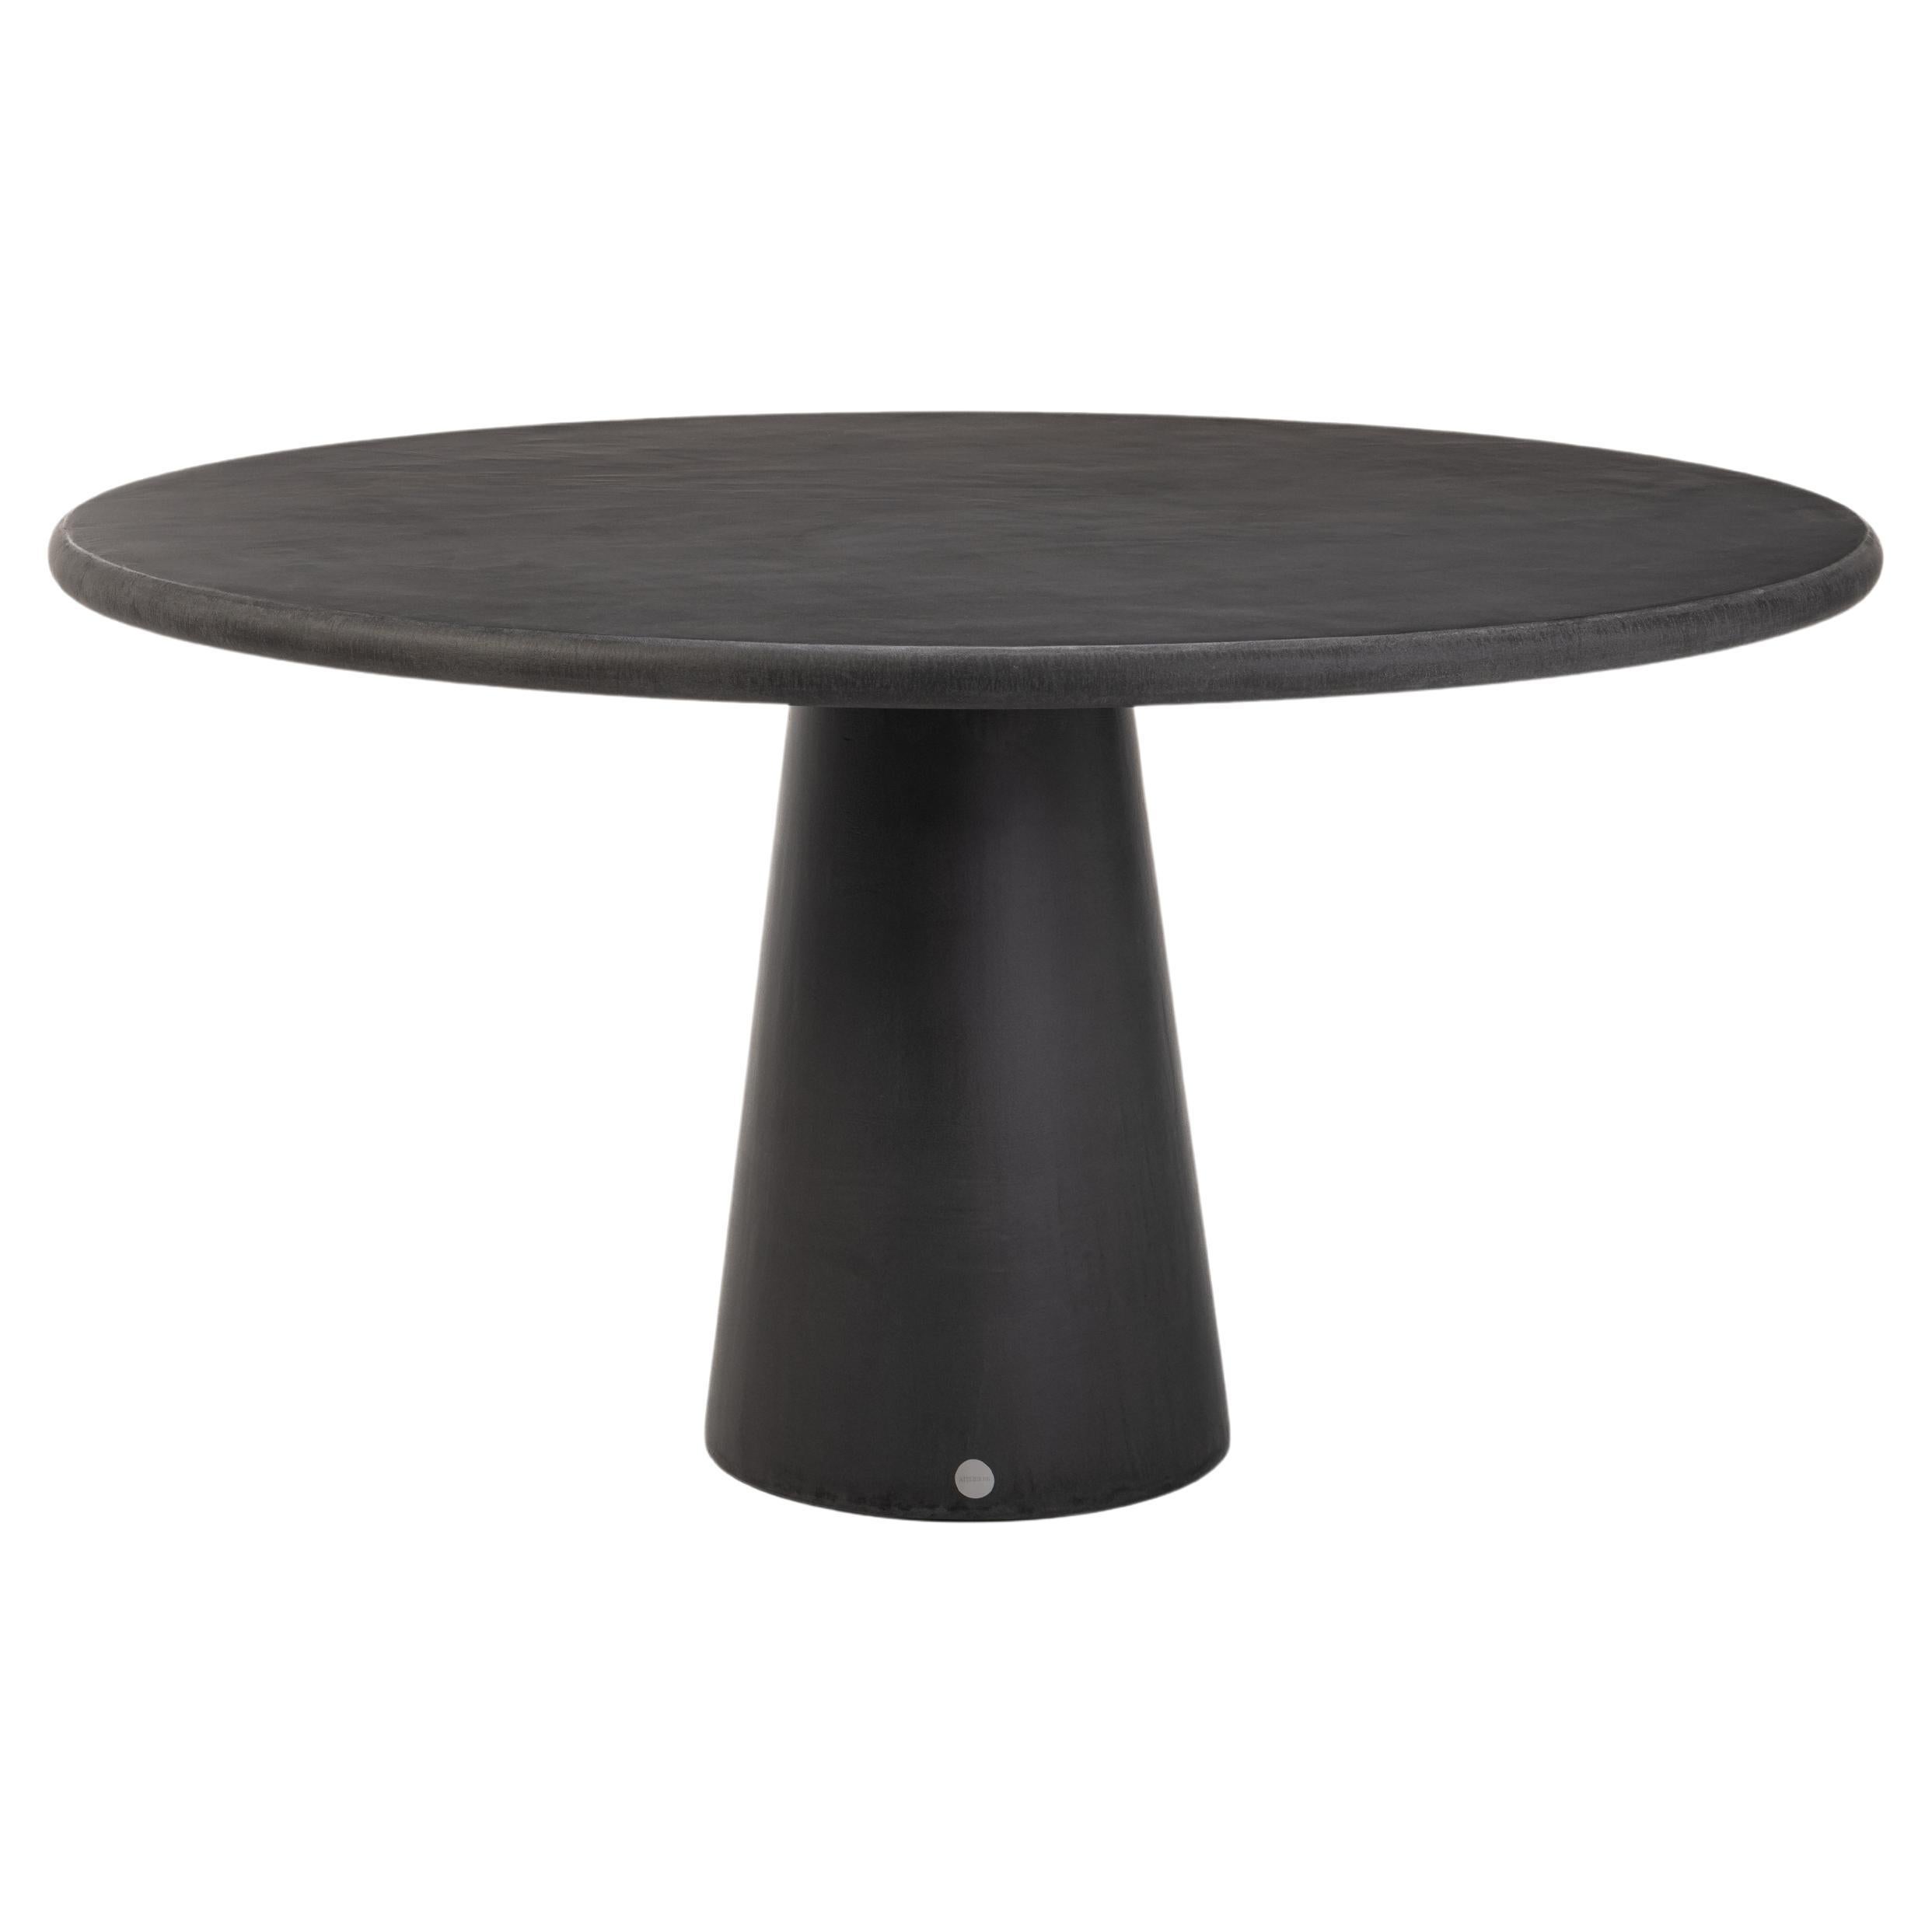 Round Natural Plaster Dining Table "Cone" 120 by Isabelle Beaumont For Sale